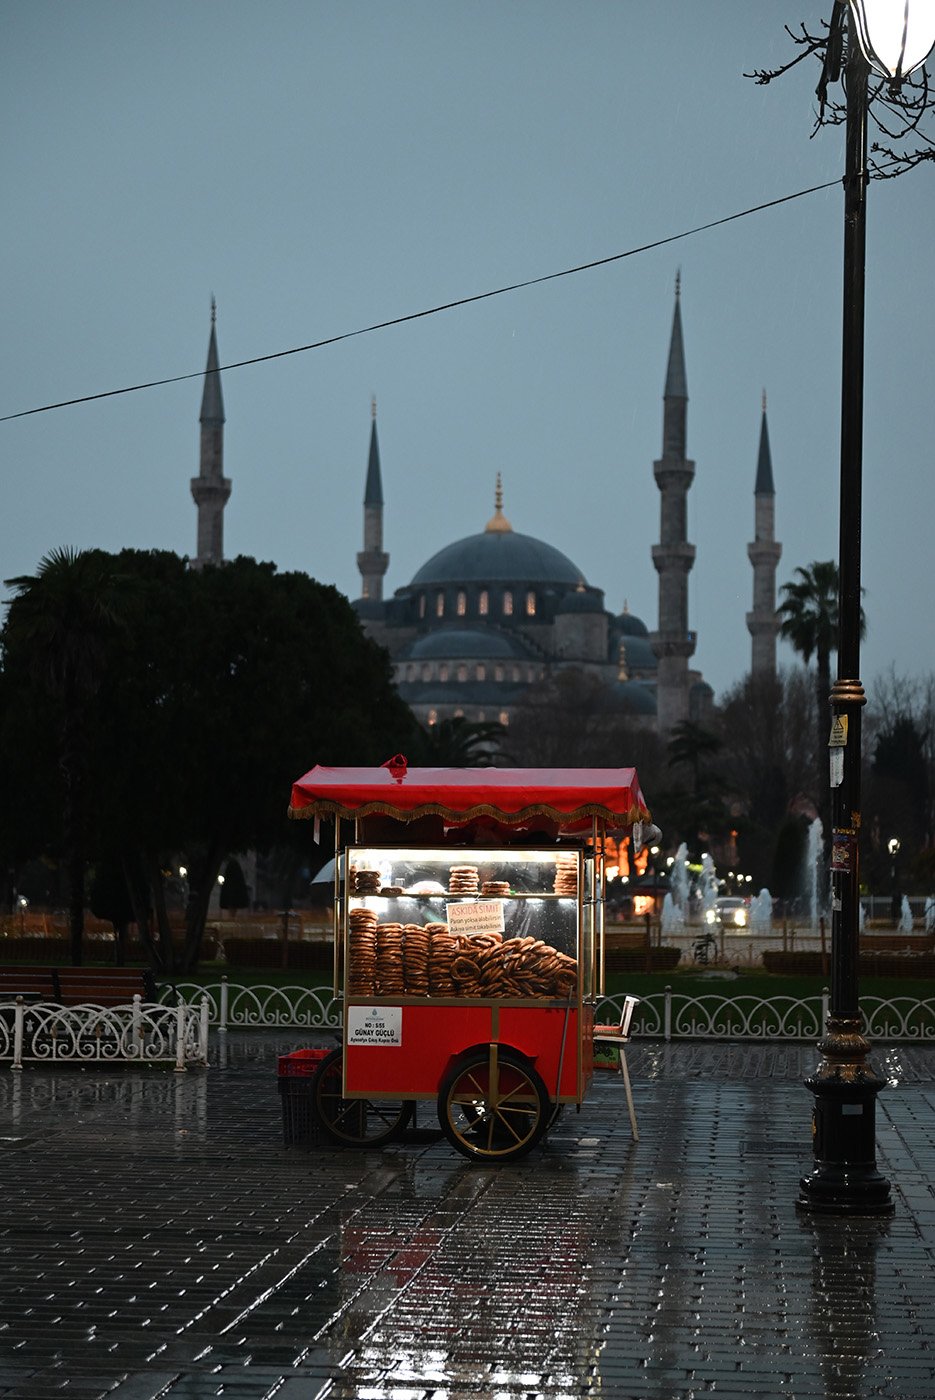 Bagel cart in front of the Blue Mosque at night